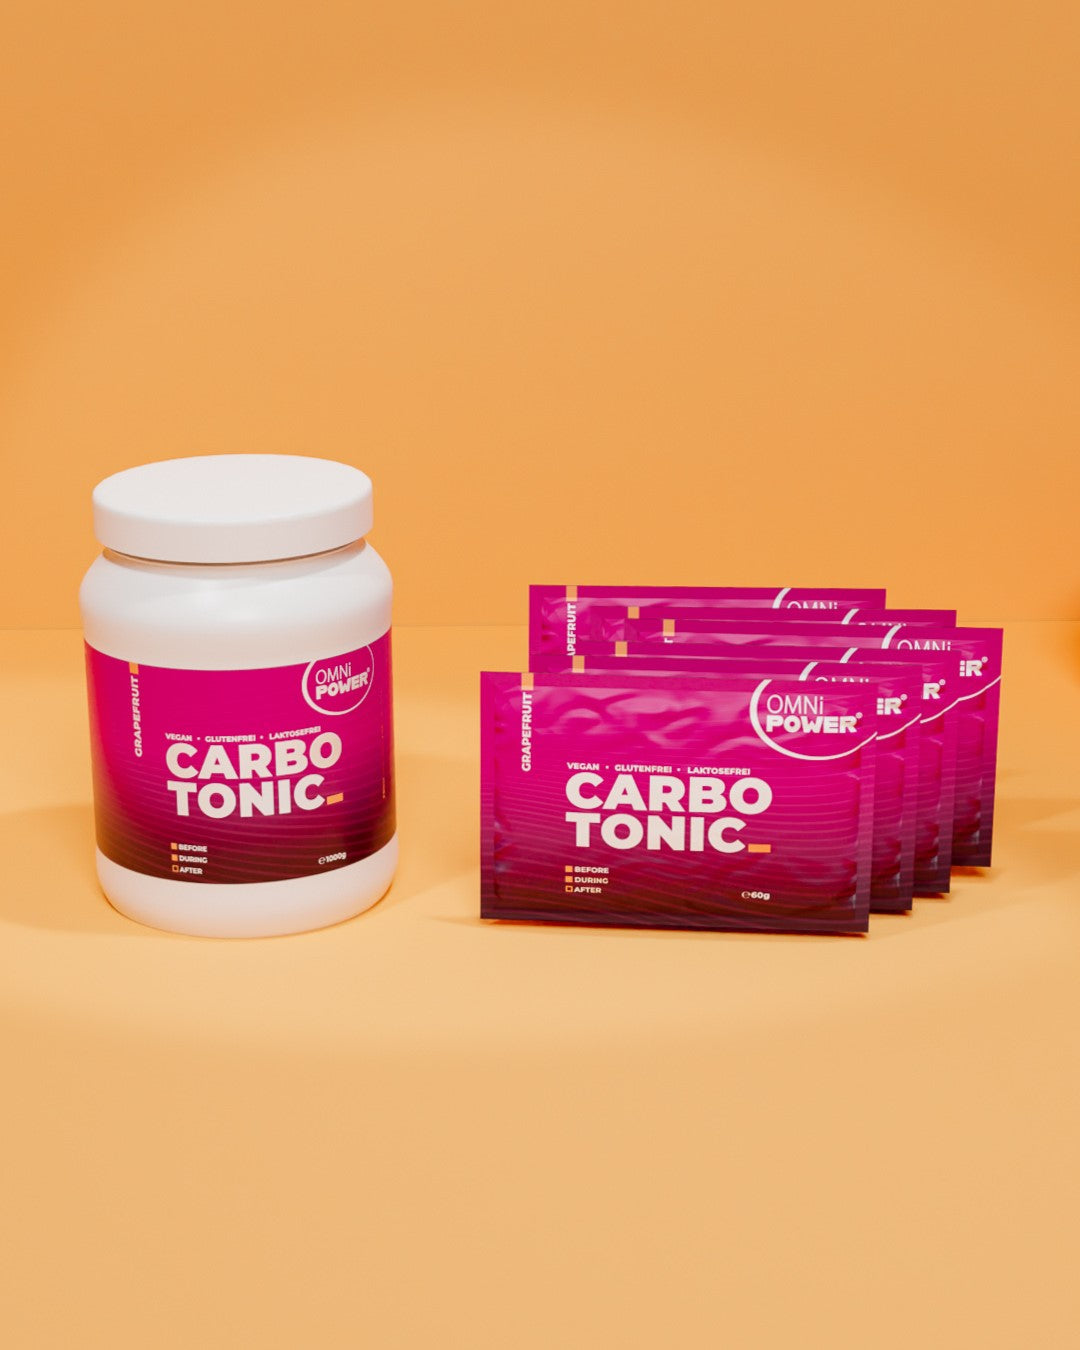 OMNi-POWER® CARBOTONIC power package